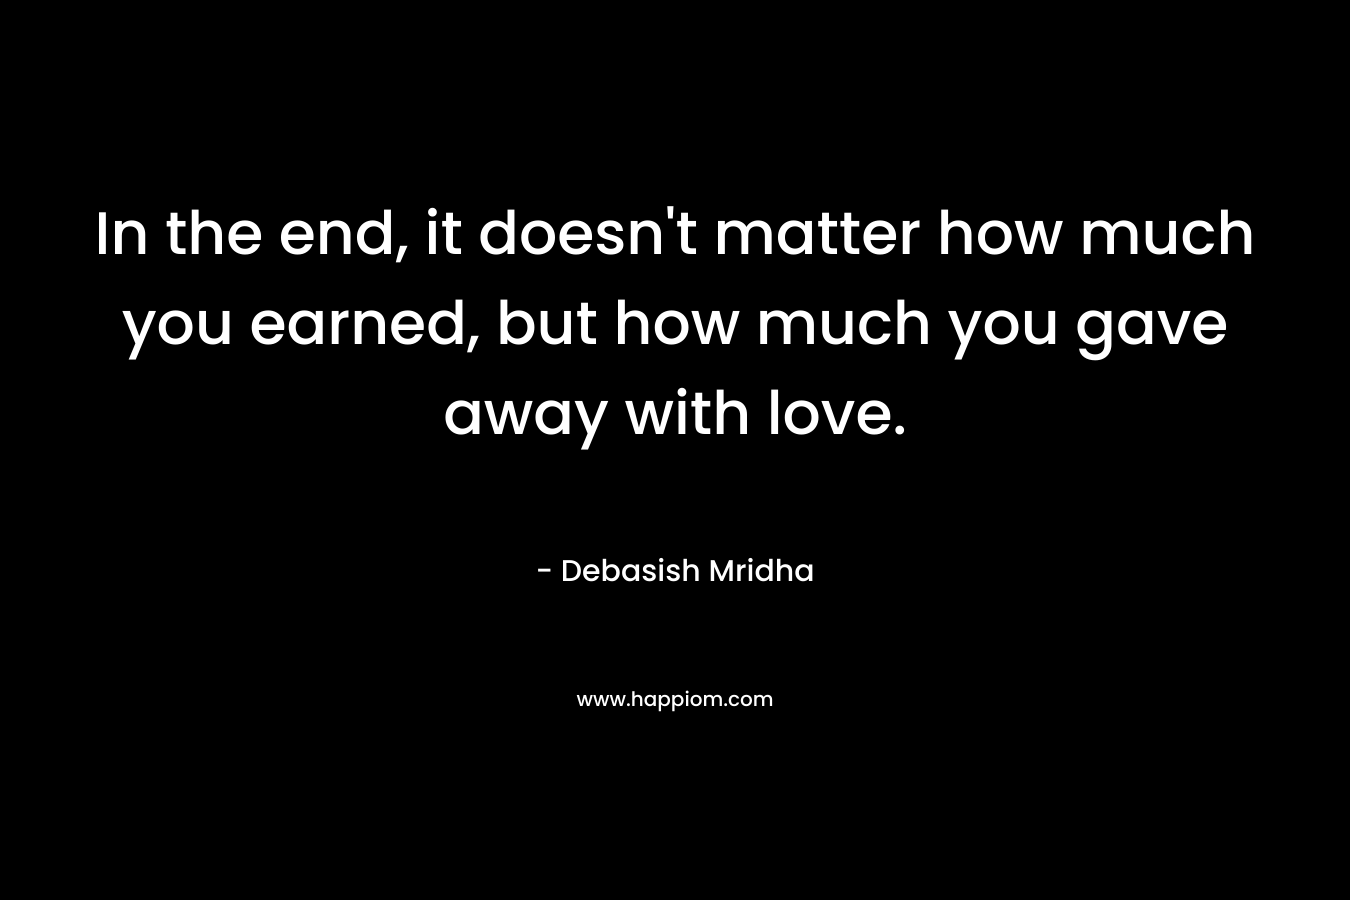 In the end, it doesn't matter how much you earned, but how much you gave away with love.